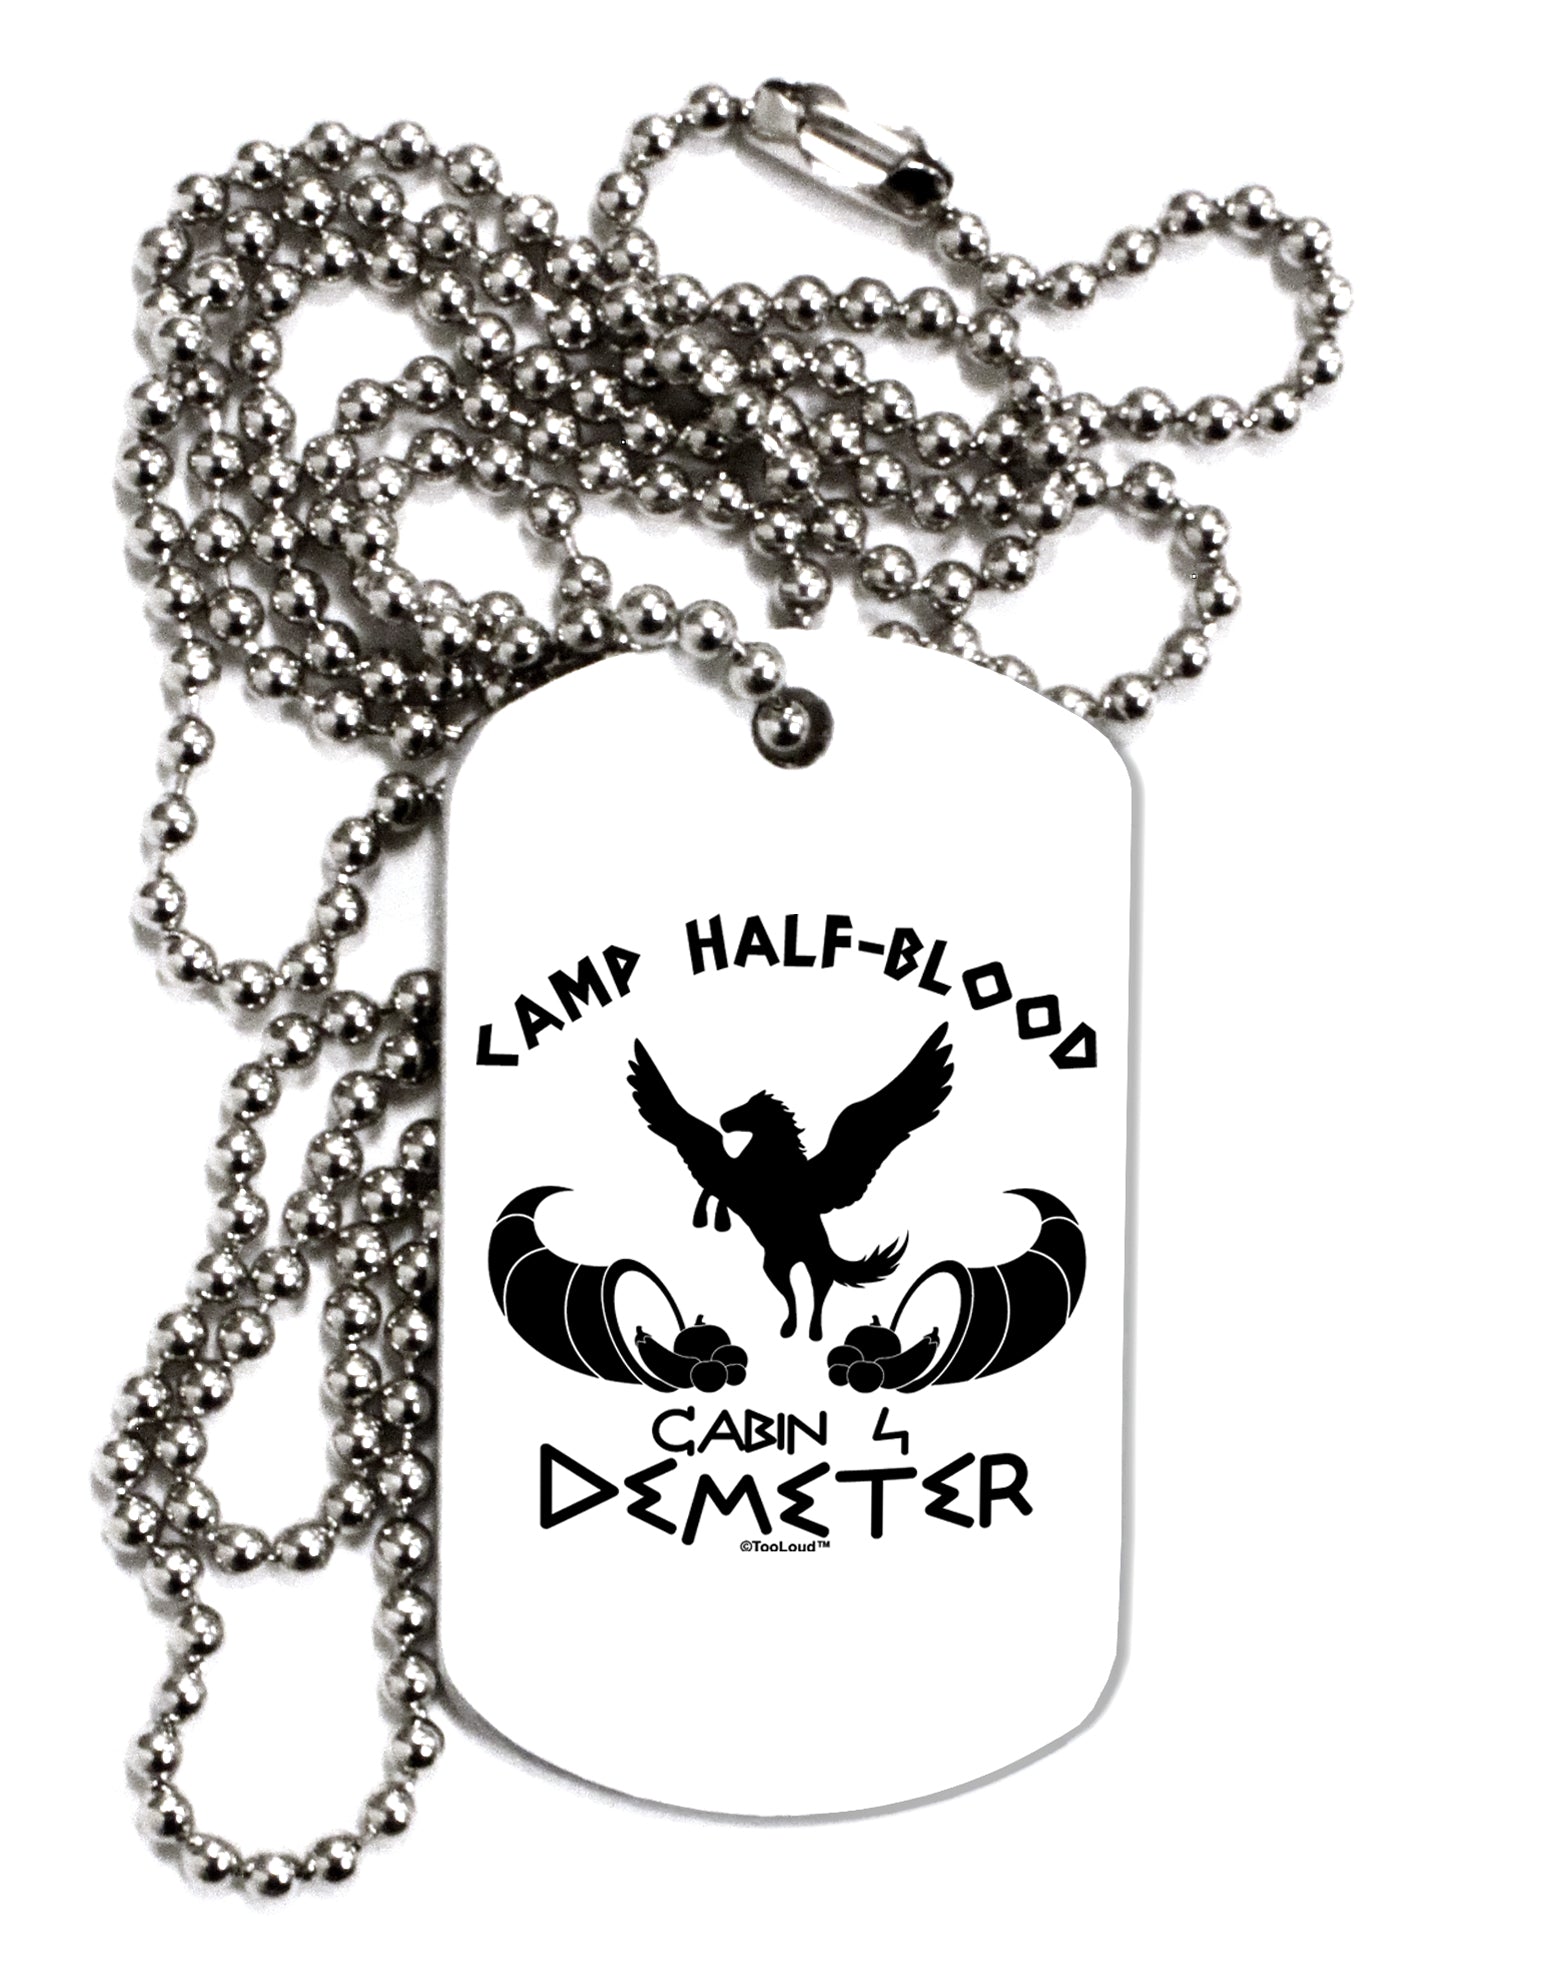 Buy CHB/SQPR Percy's Camp Half-blood Bead Necklace Online in India - Etsy